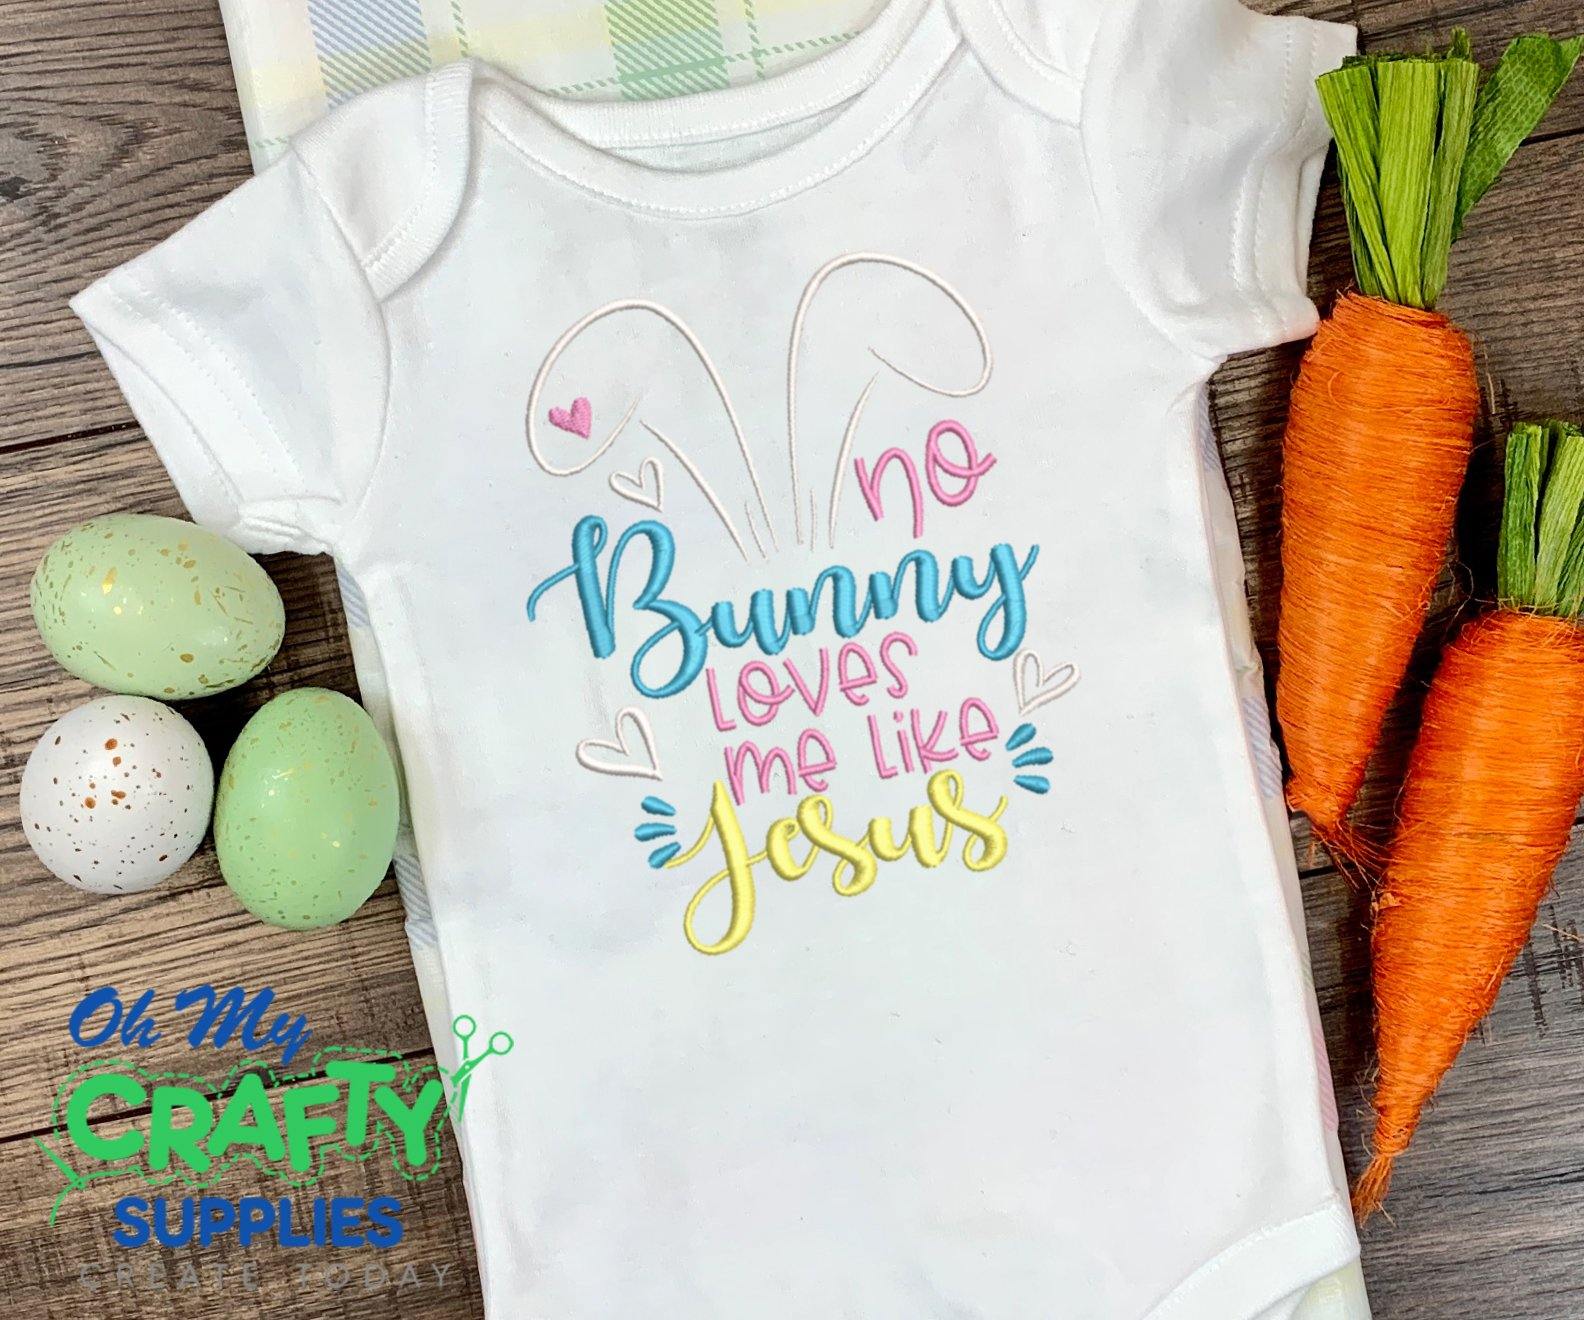 No Bunny Loves Like Jesus 2021 Embroidery Design - Oh My Crafty Supplies Inc.